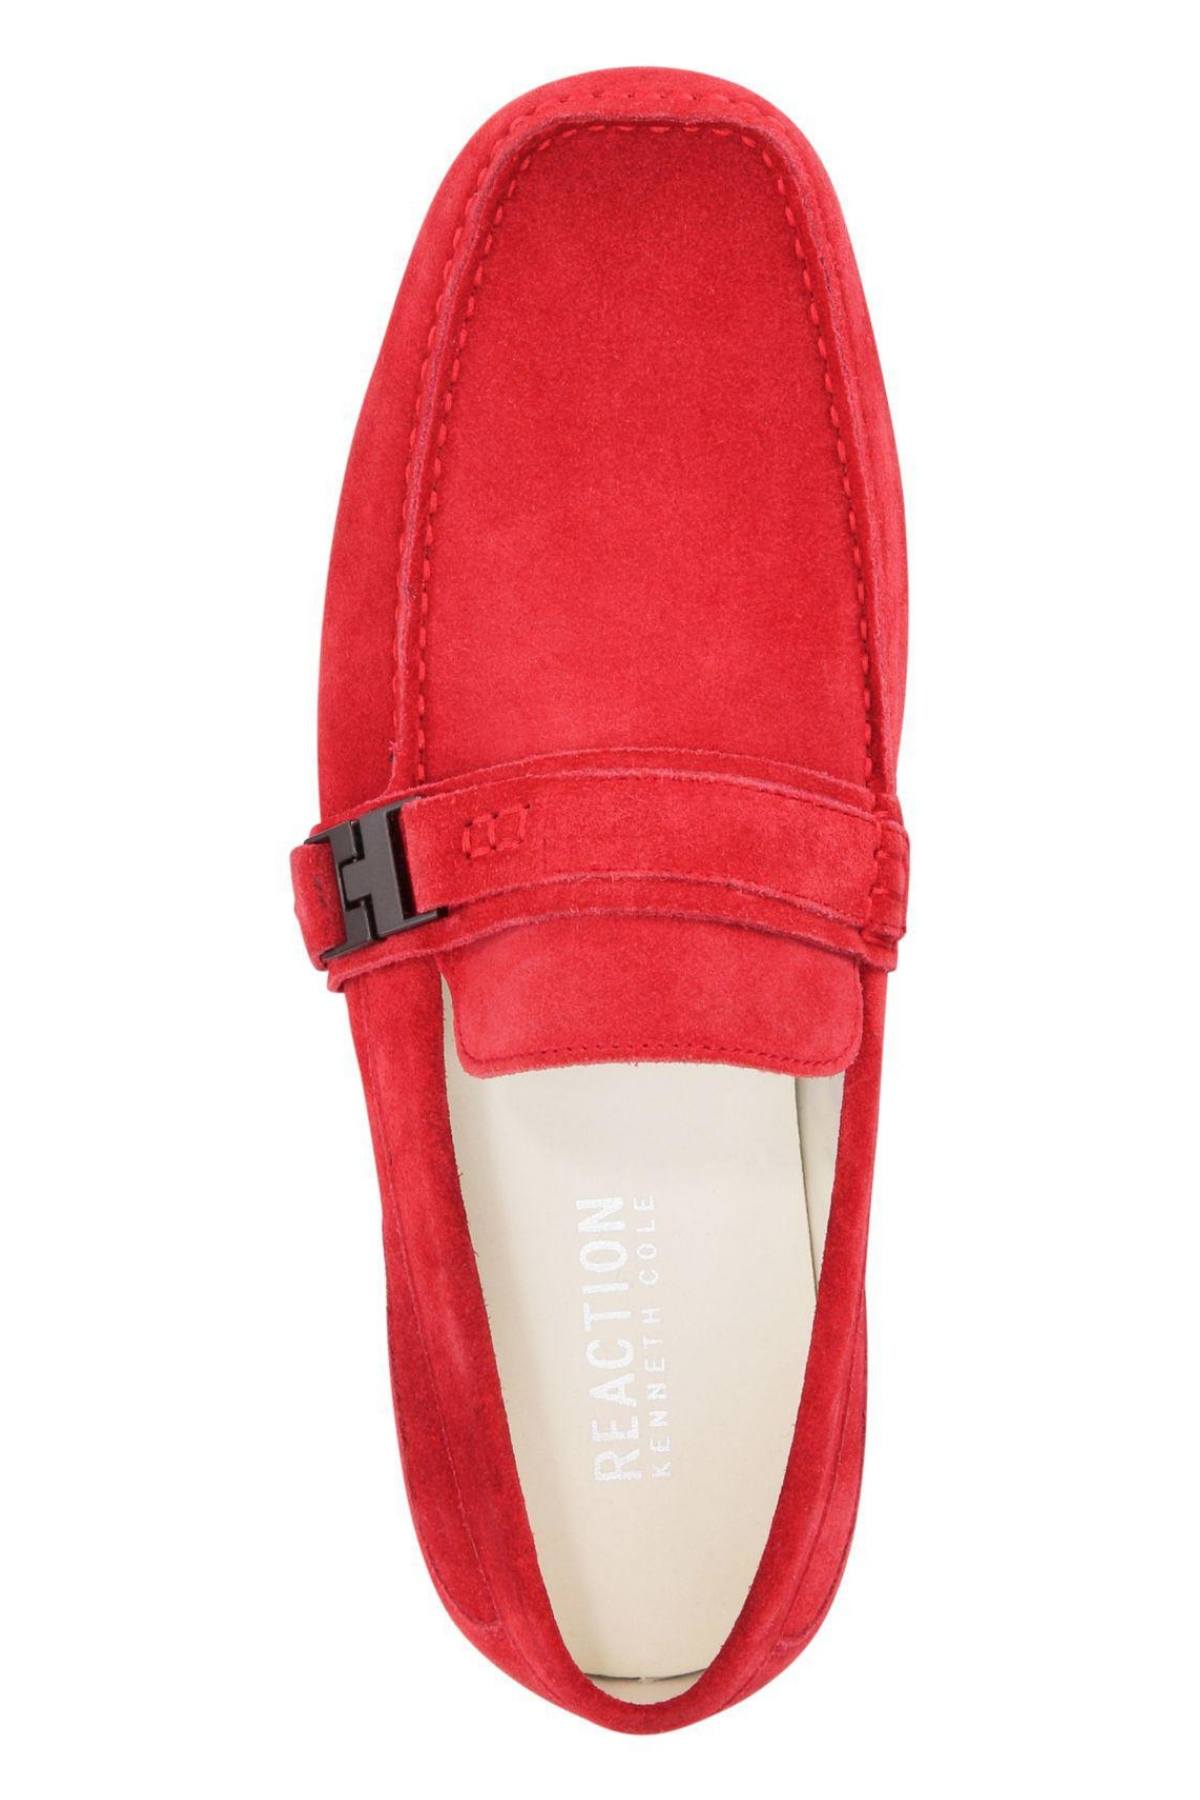 Kenneth Cole Reaction Red Suede Toast-2-Me Driver